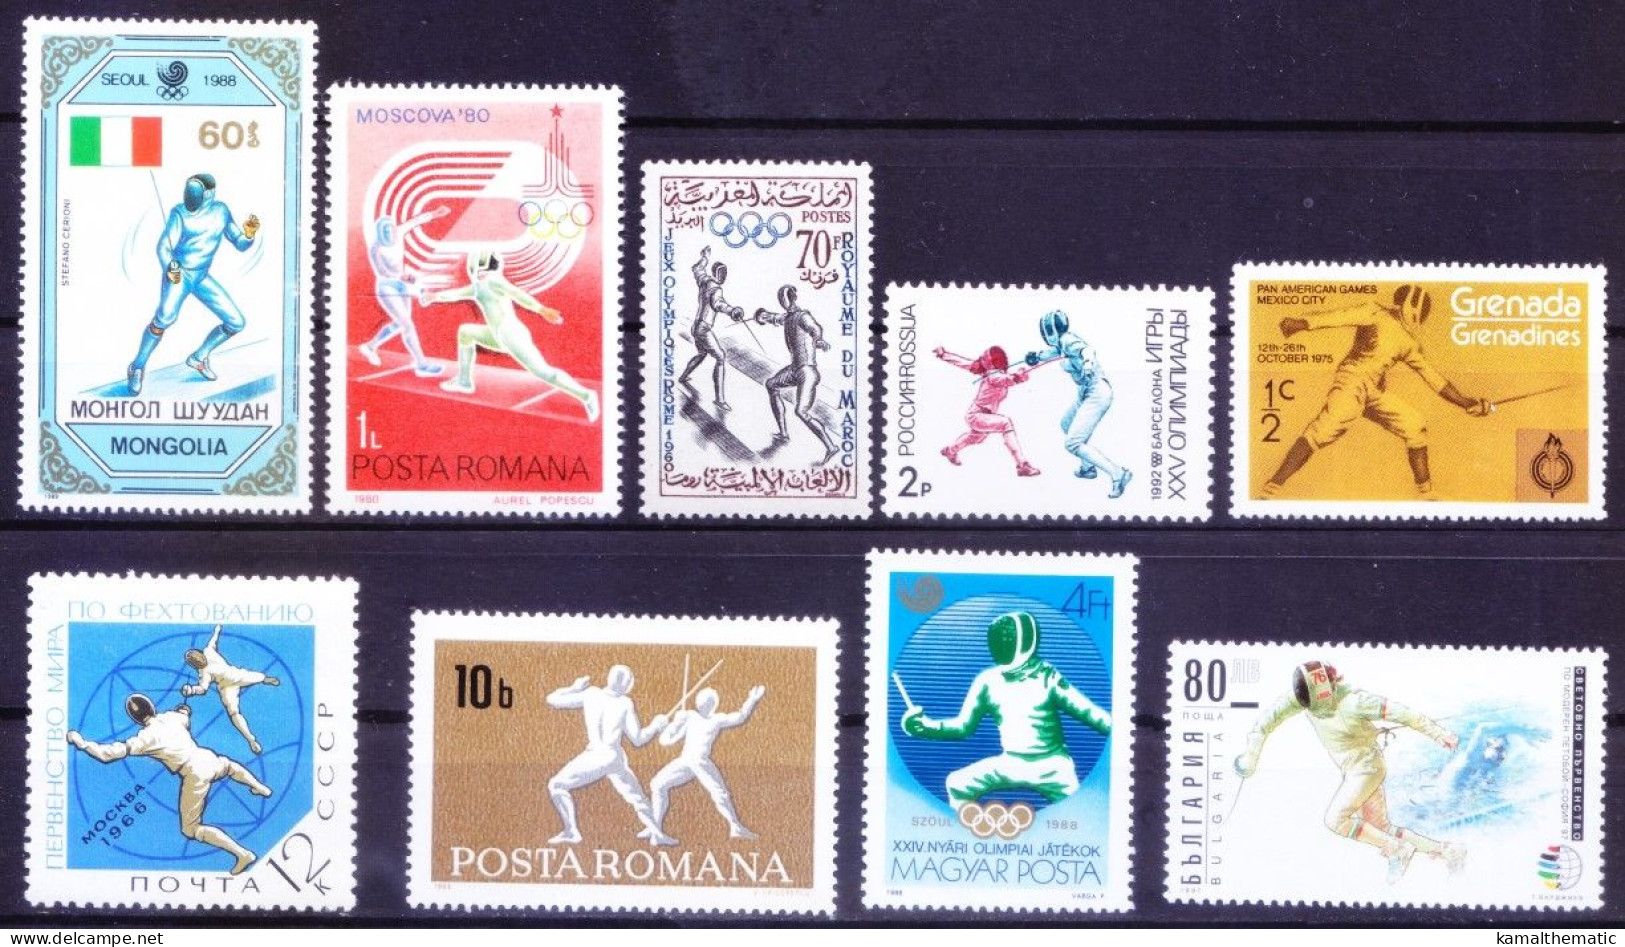 Fencing, Sword Fighting, Sports, Olympic, 9 Different MNH Stamps - Fencing